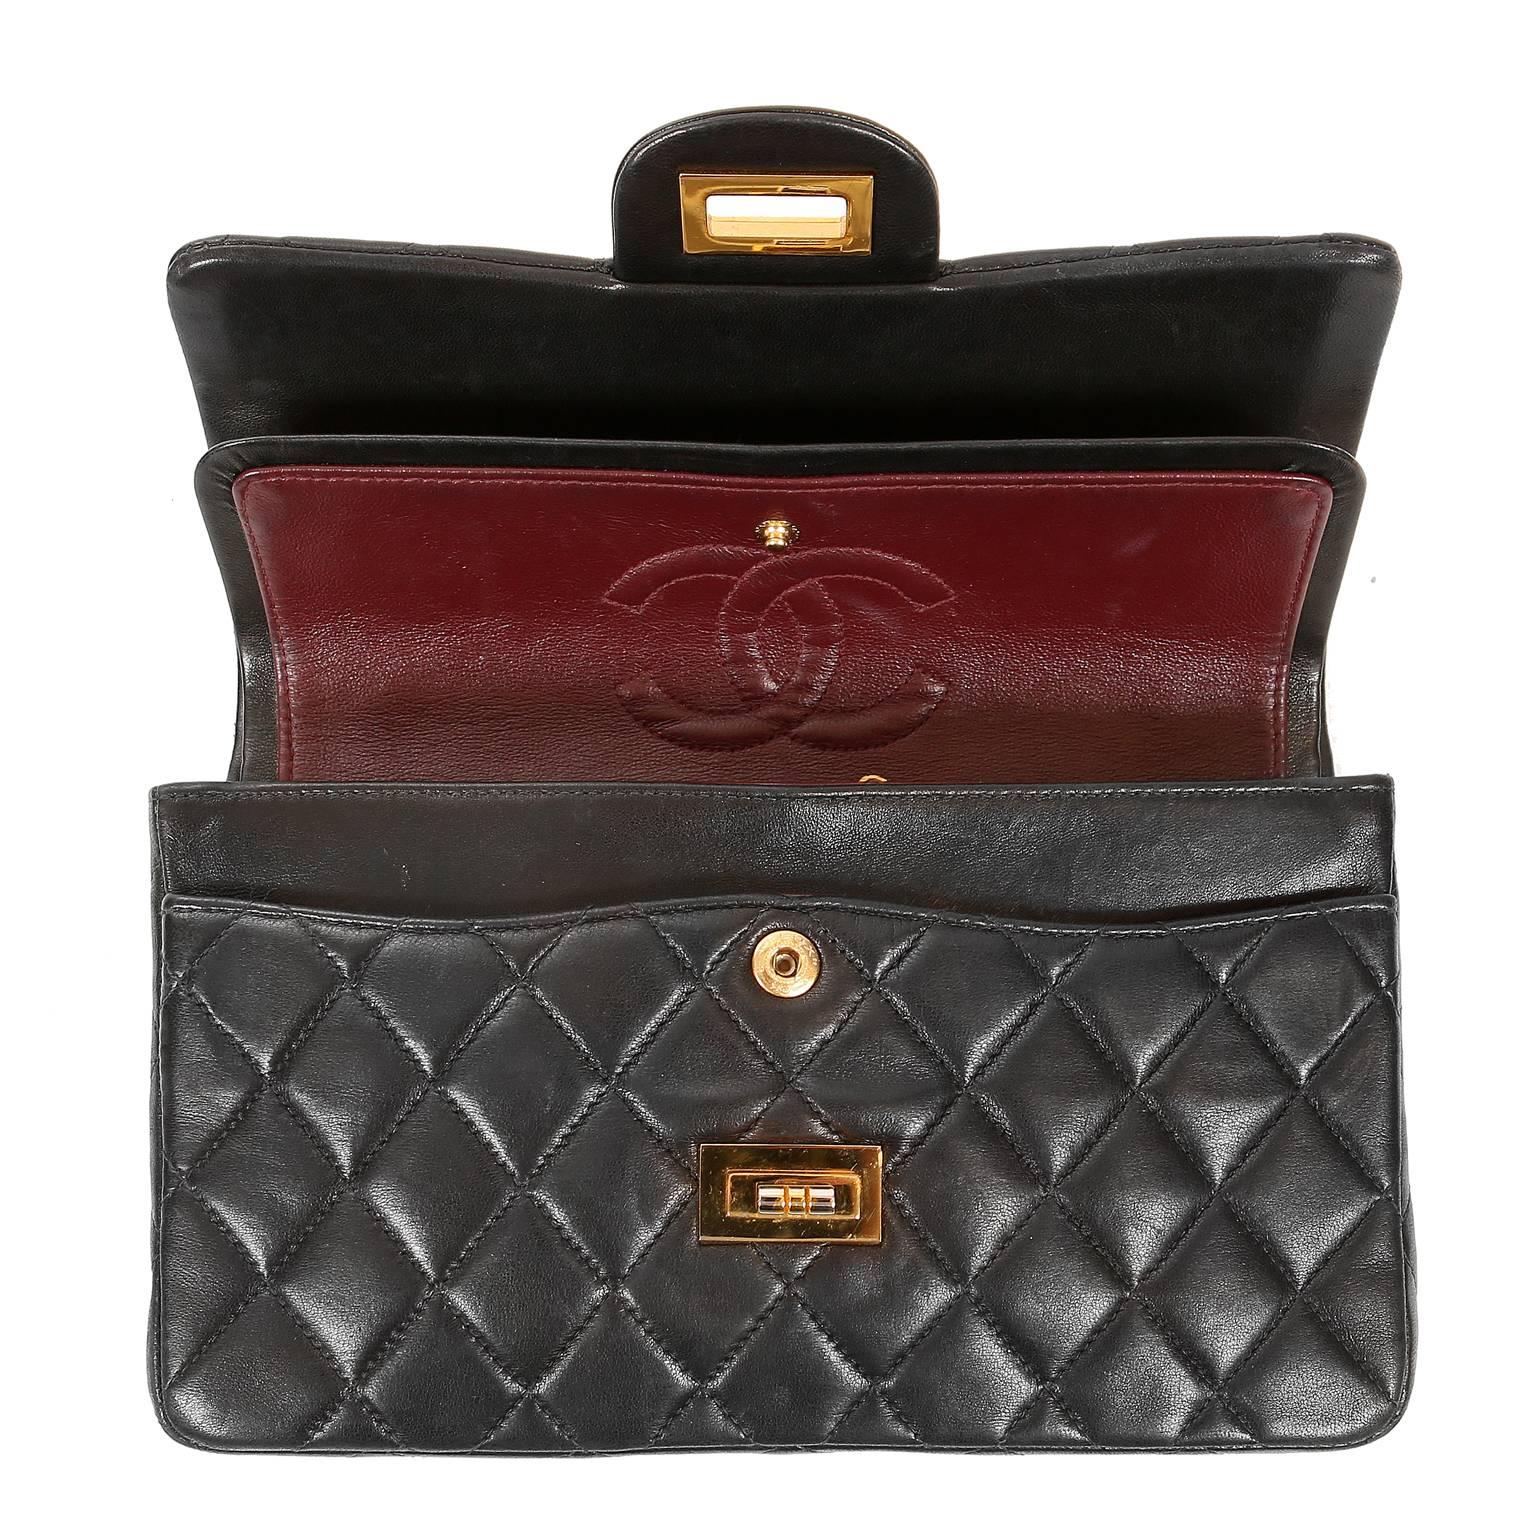 Women's Chanel Black Lambskin 2.55 Reissue Medium Flap Bag with Gold Hardware For Sale